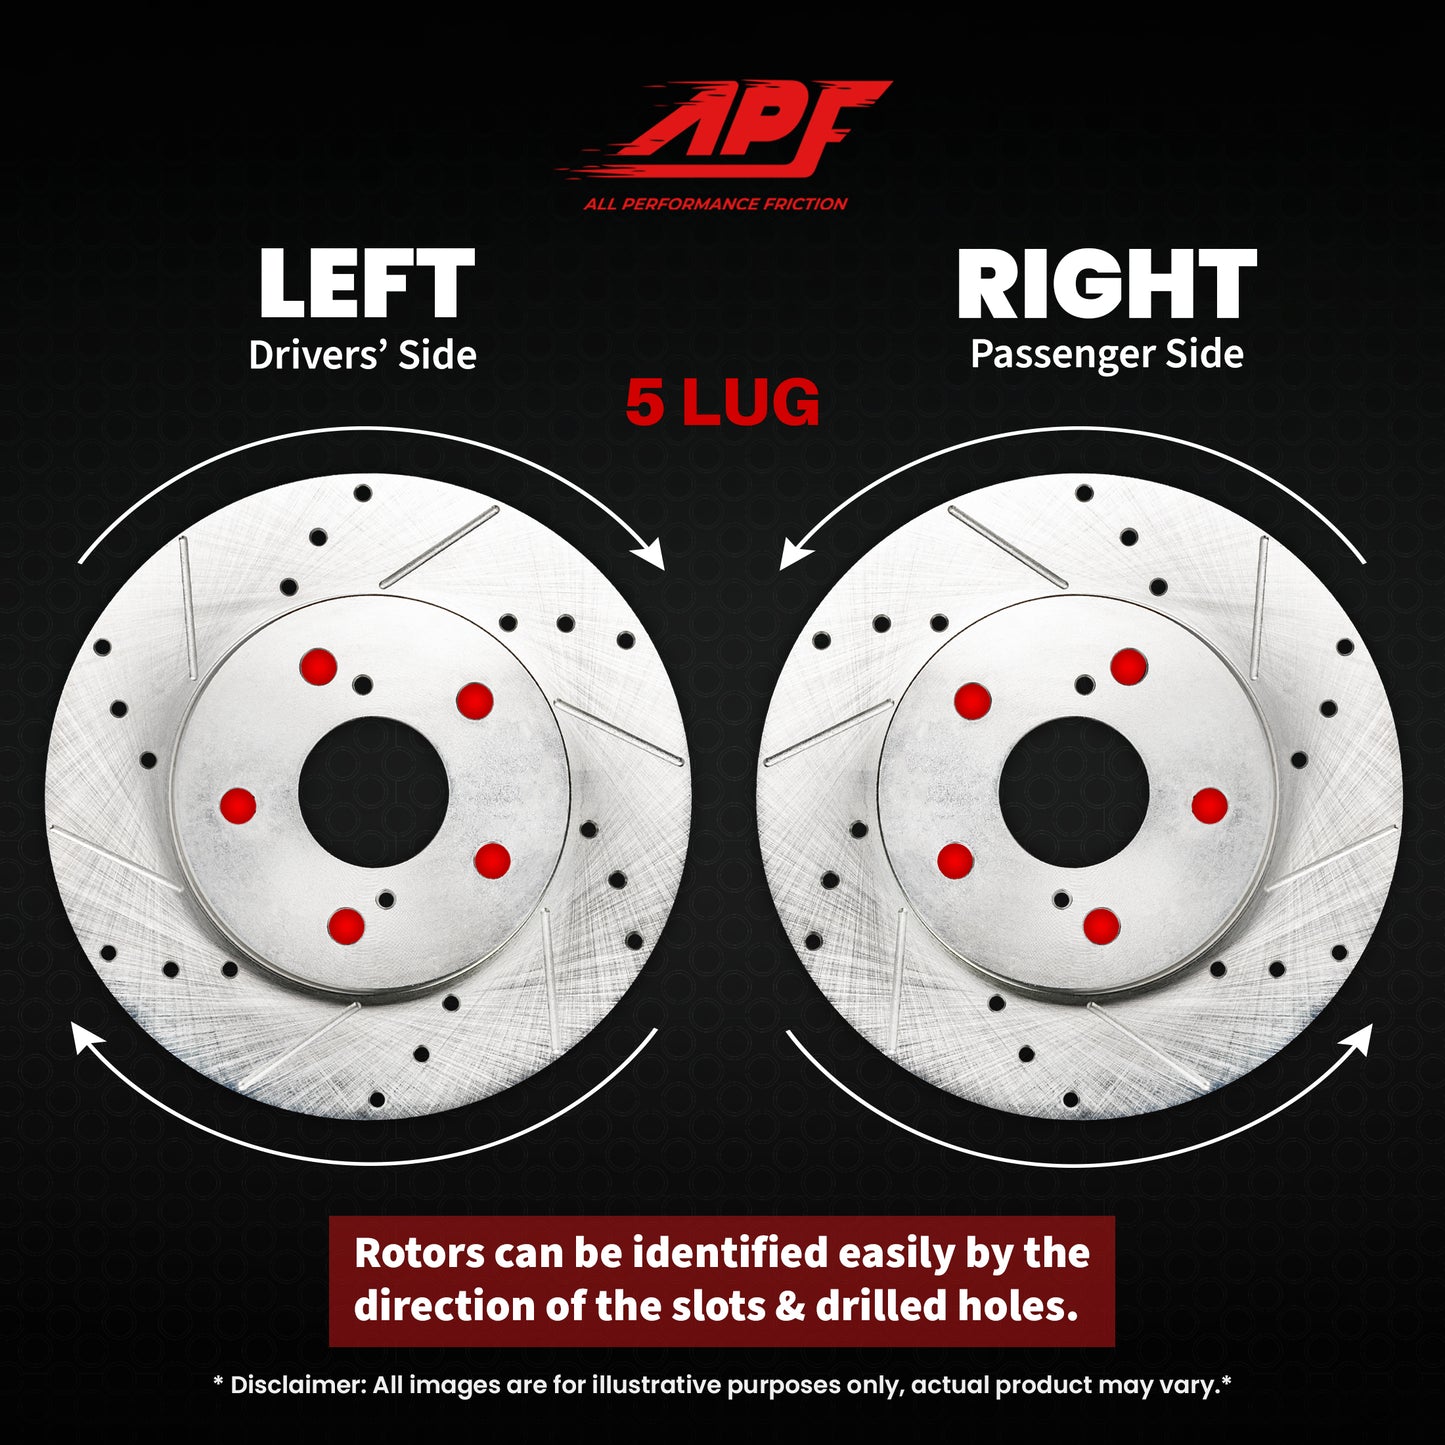 APF All Performance Friction Front and Rear Rotors and Pads Full Kit compatible with Lexus GS300 1998-2005 Zinc Drilled Slotted Rotors with Ceramic Carbon Fiber Brake Pads | $494.6